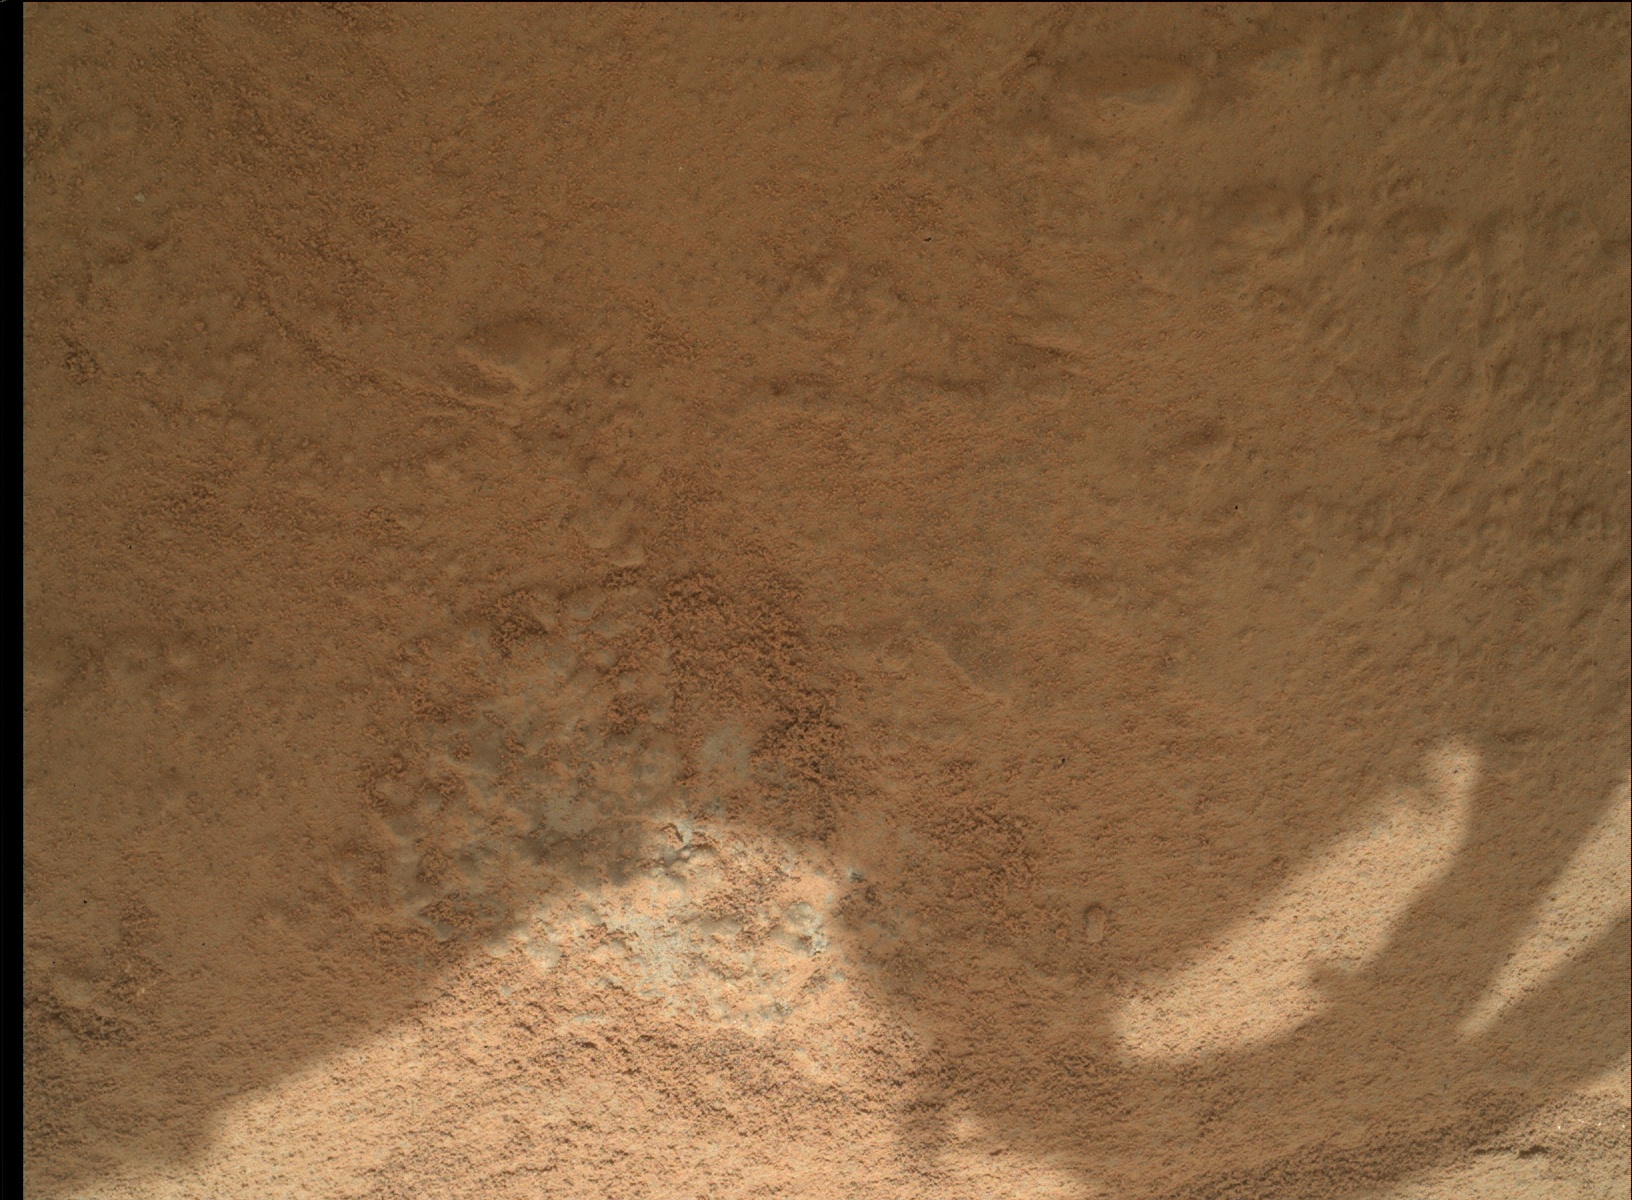 Nasa's Mars rover Curiosity acquired this image using its Mars Hand Lens Imager (MAHLI) on Sol 174